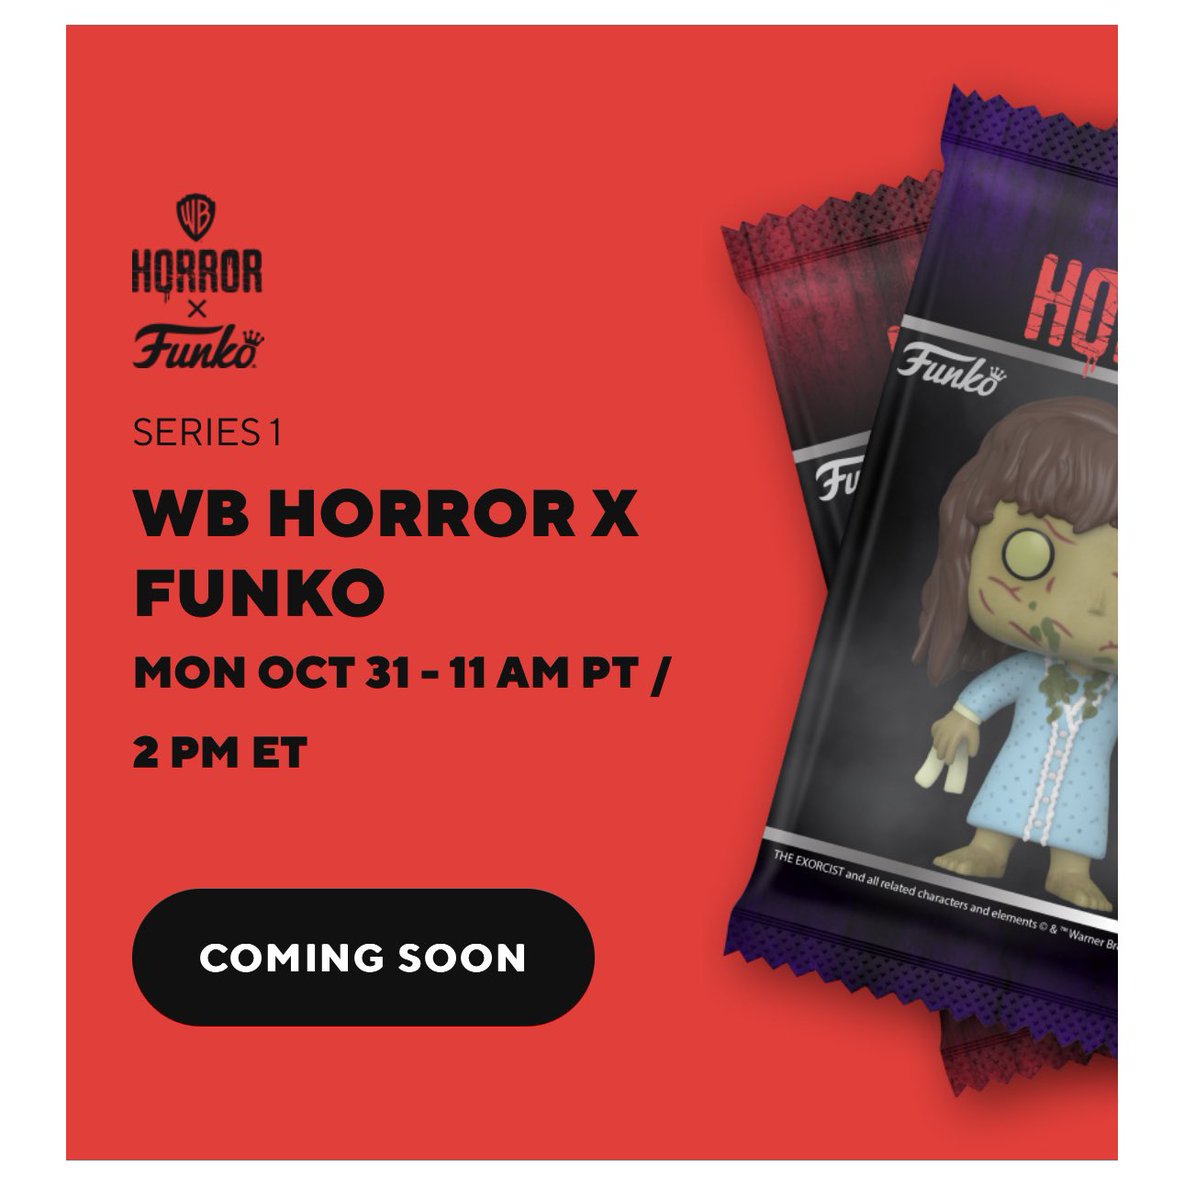 WB Horror x Funko NFT packs drop on Halloween! . #Funko #FunkoPop #FunkoPopVinyl #Pop #PopVinyl #Collectibles #Collectible #DisTrackers